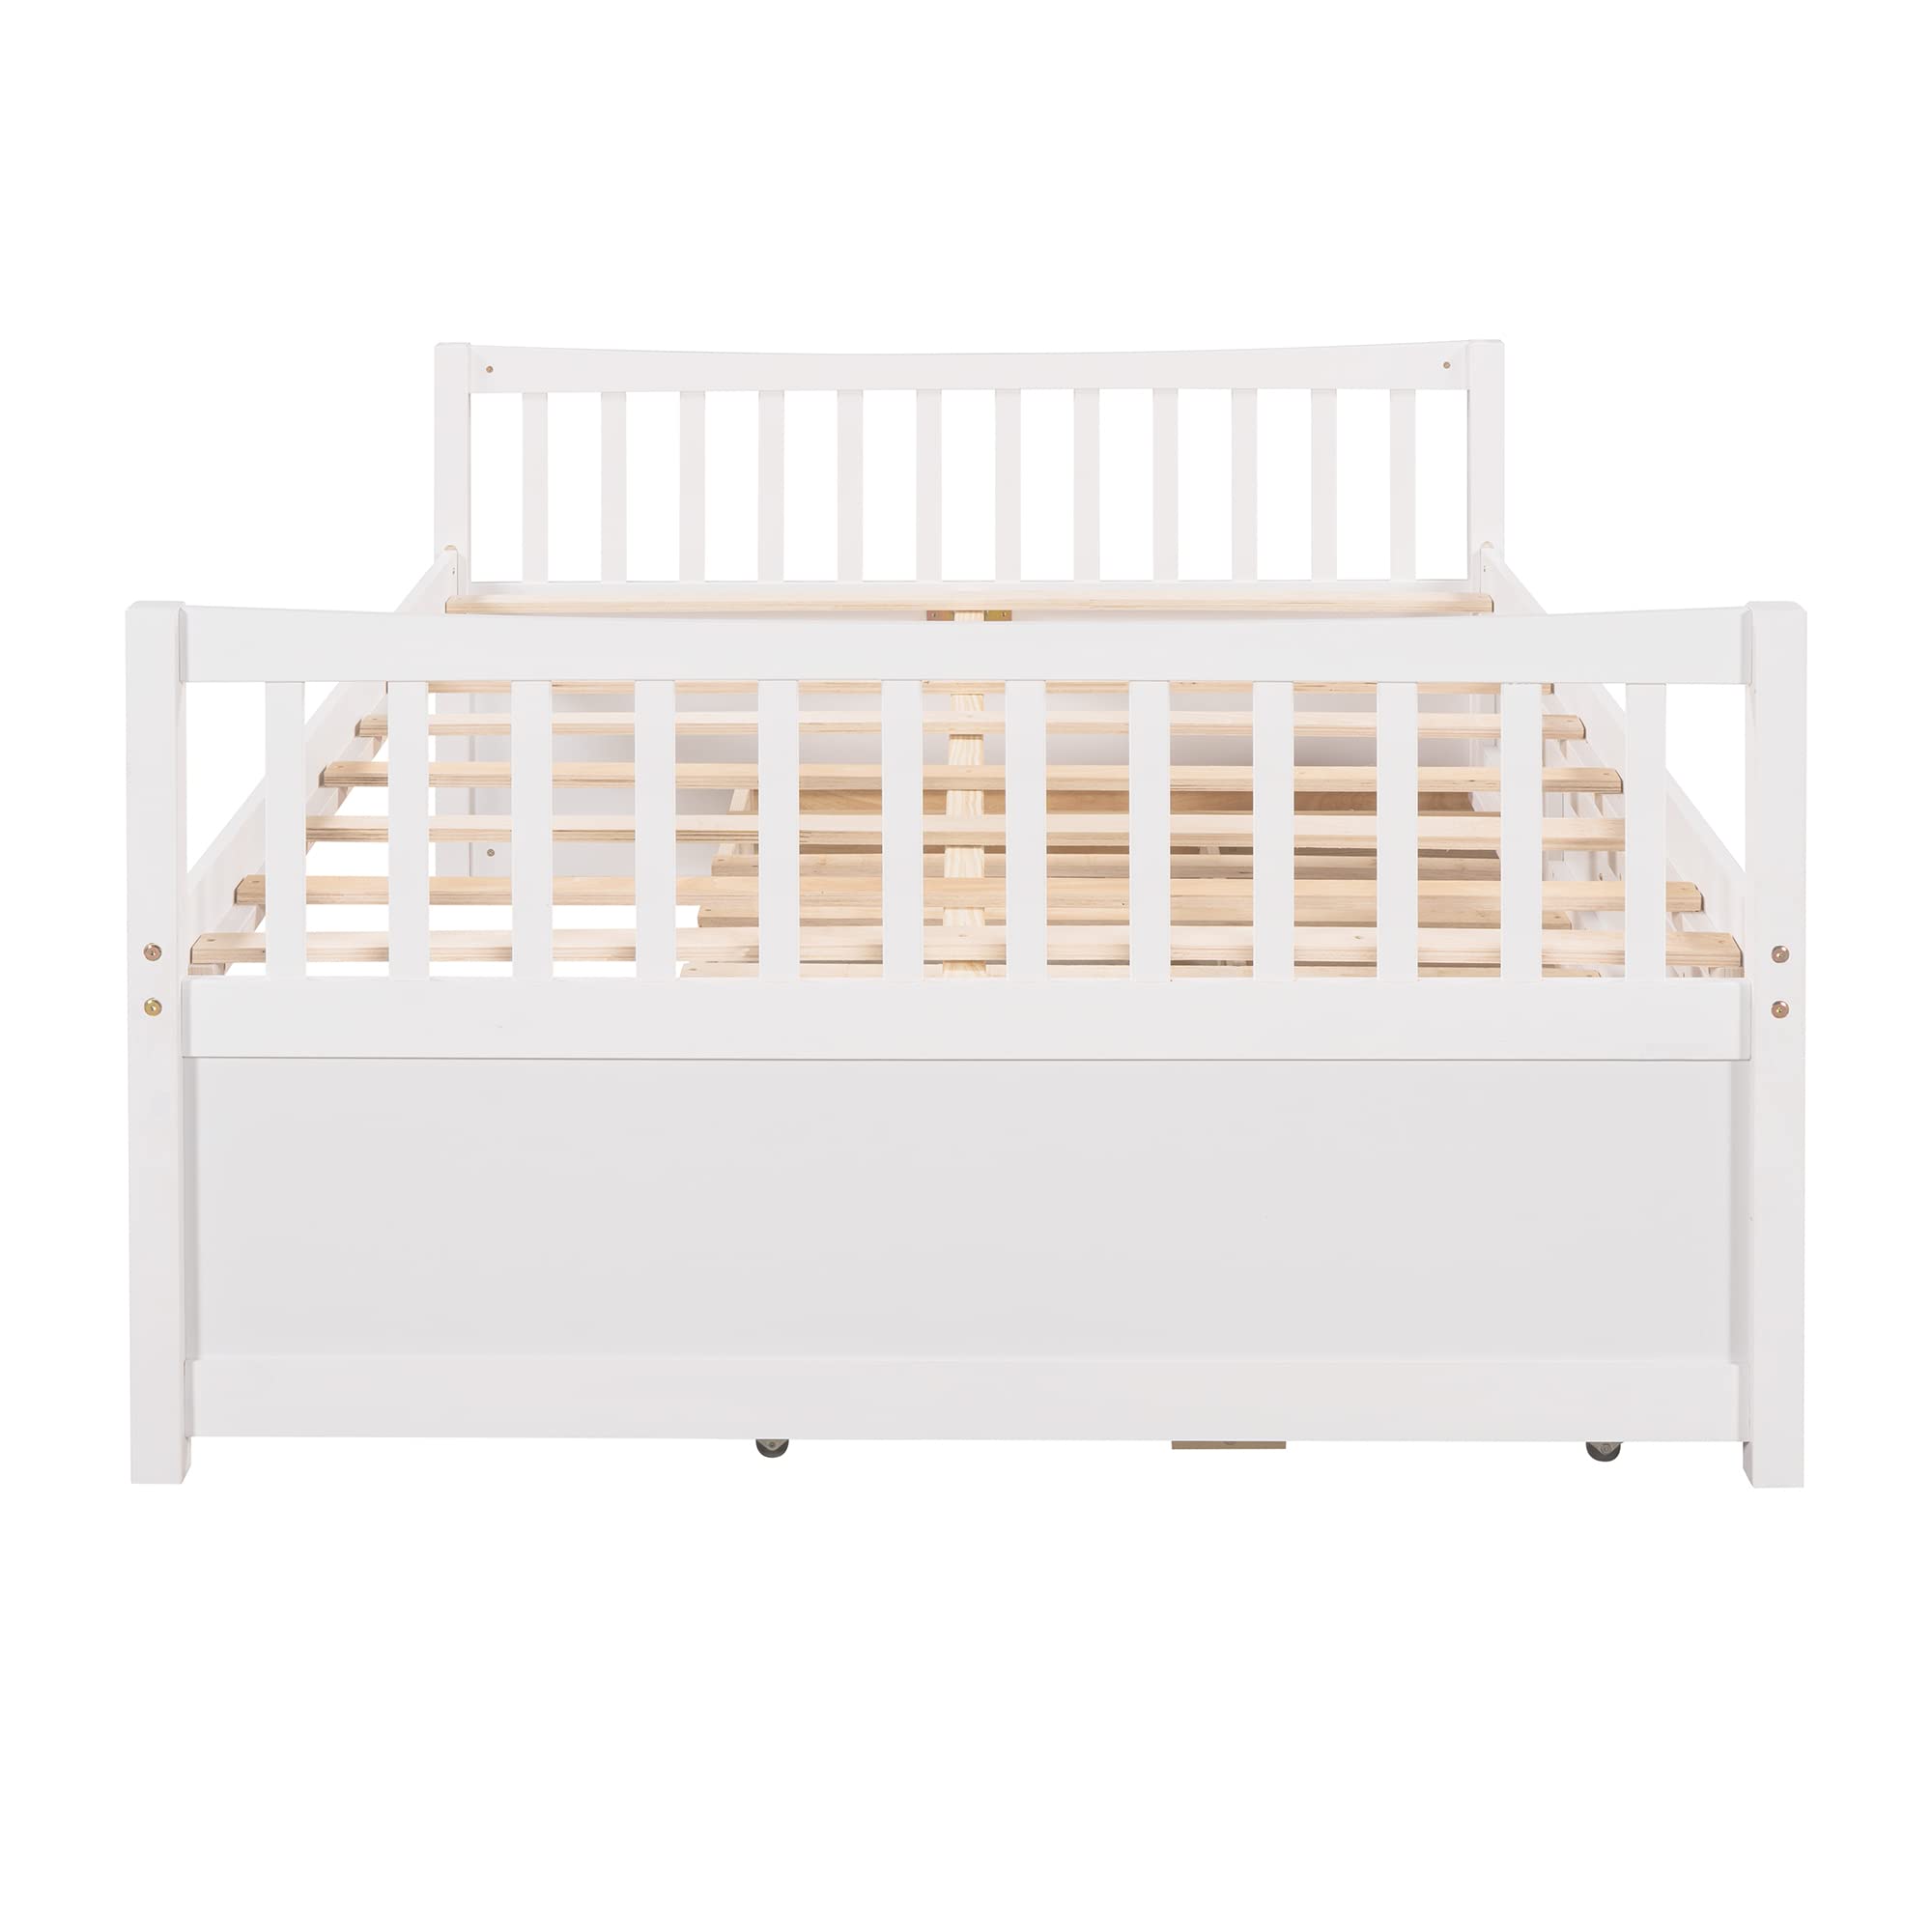 Harper & Bright Designs Full Size Daybed with Twin Size Trundle and 3 Storage Drawers, Wood Full Captain’s Bed with Trundle Bed, Full Platform Bed Great for Kids Guests Sleepovers (White)